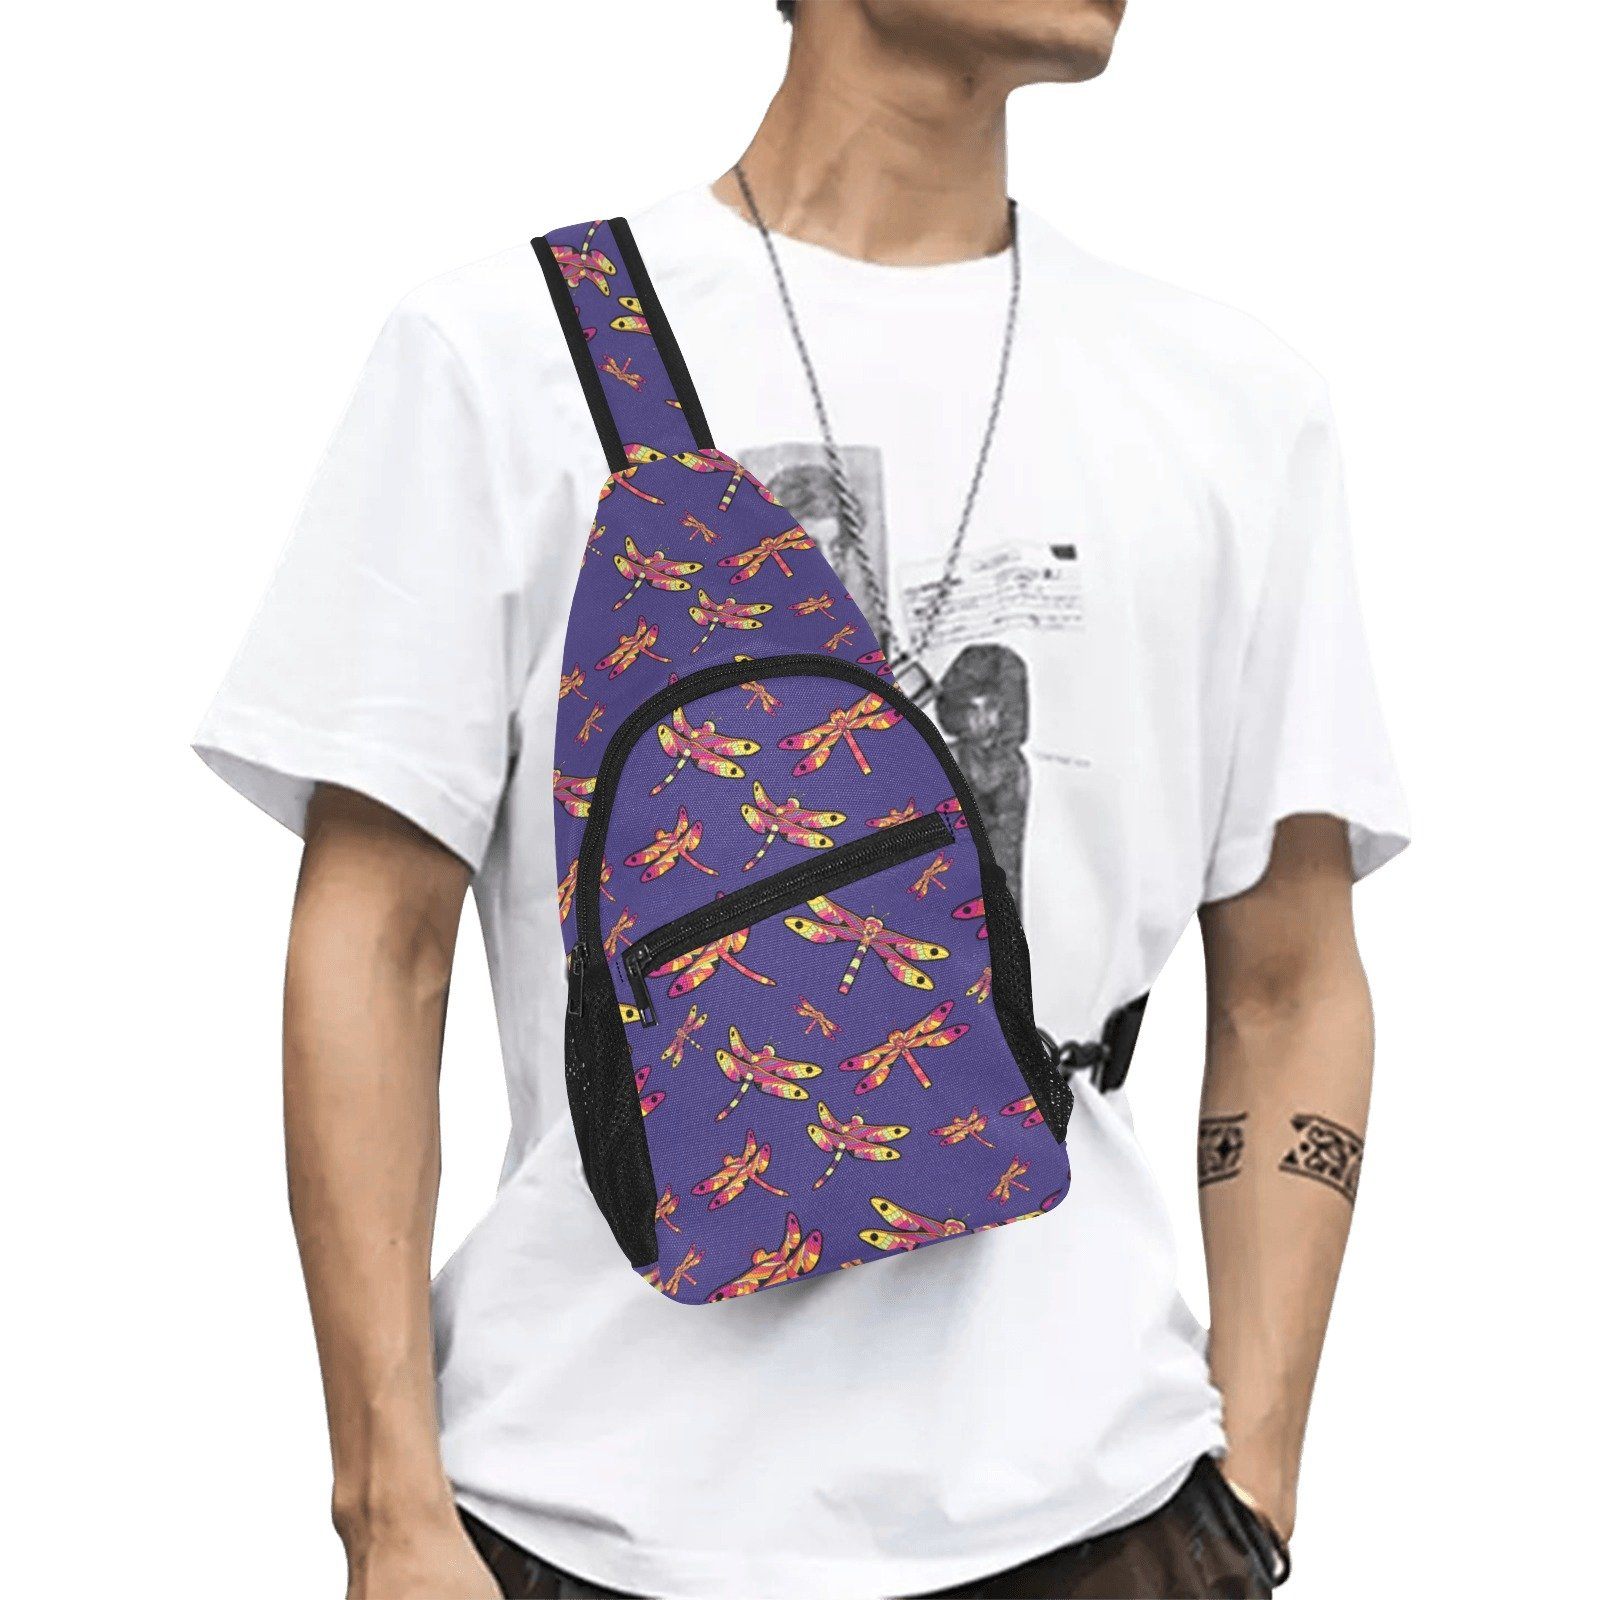 Gathering Purple All Over Print Chest Bag (Model 1719) All Over Print Chest Bag (1719) e-joyer 